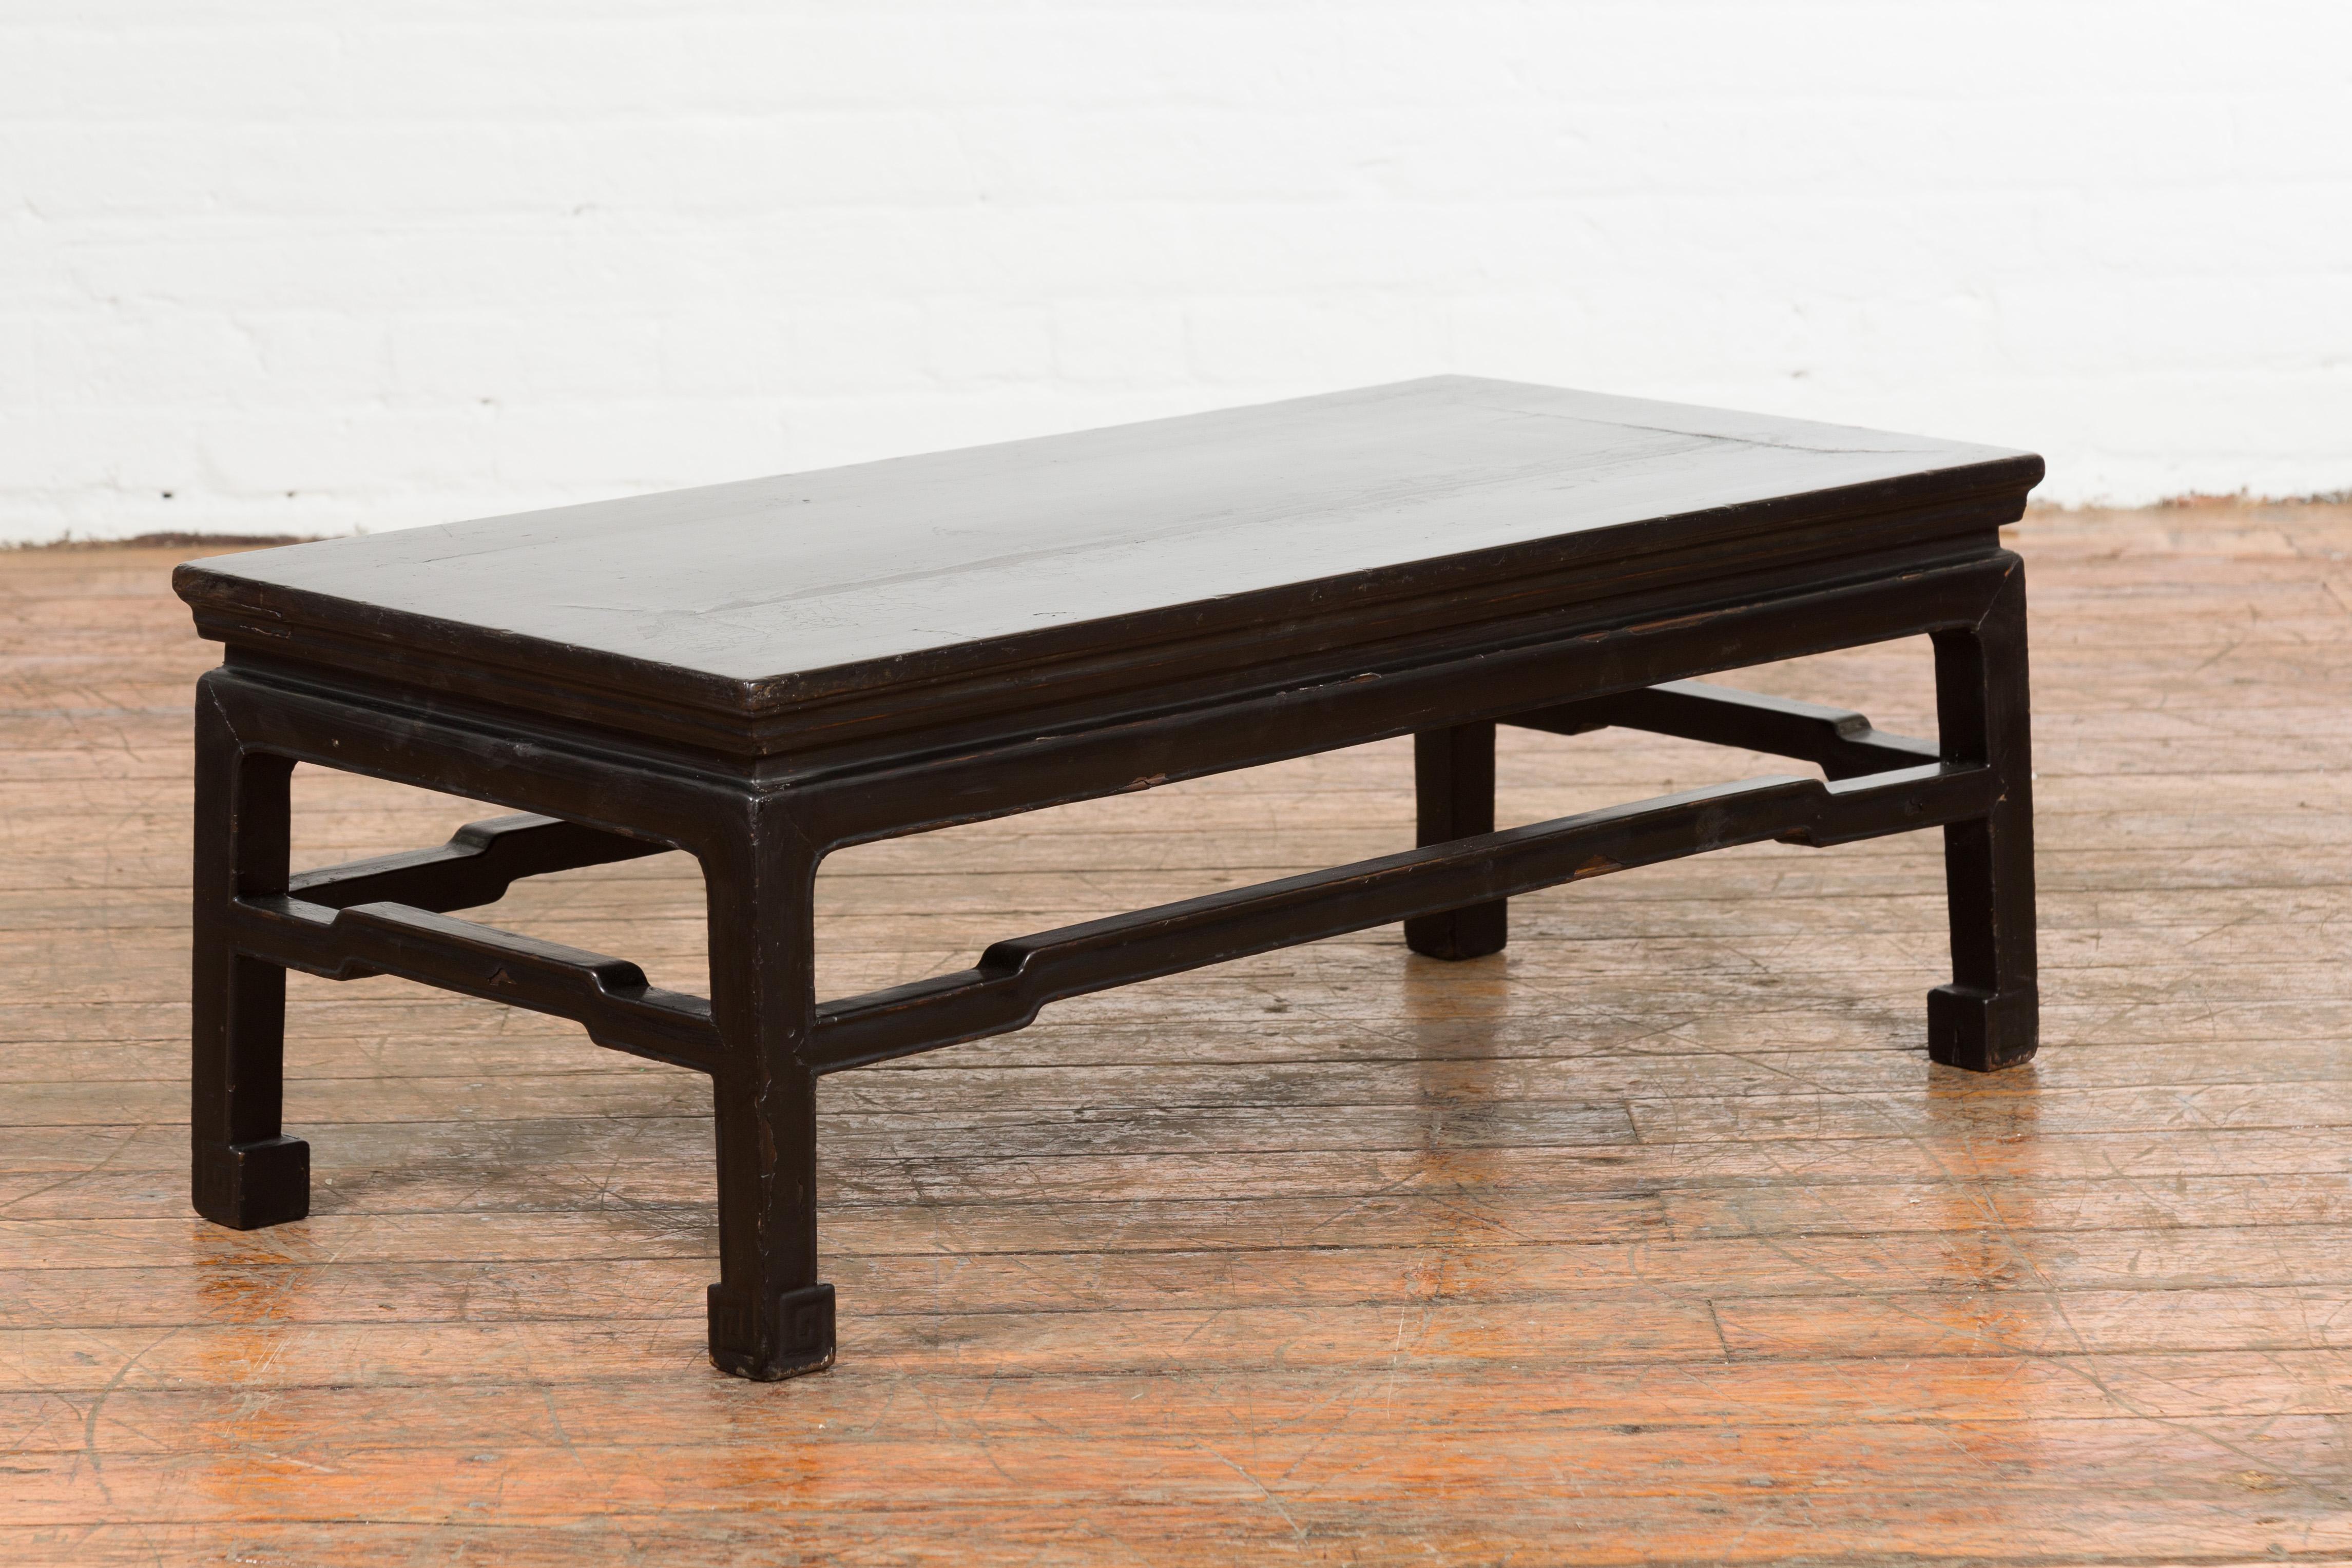 A Chinese Ming Dynasty style vintage black lacquer coffee table from the mid 20th century, with horse hoof legs and humpback stretchers. Created in China during the midcentury period, this black lacquer coffee table features a rectangular waisted